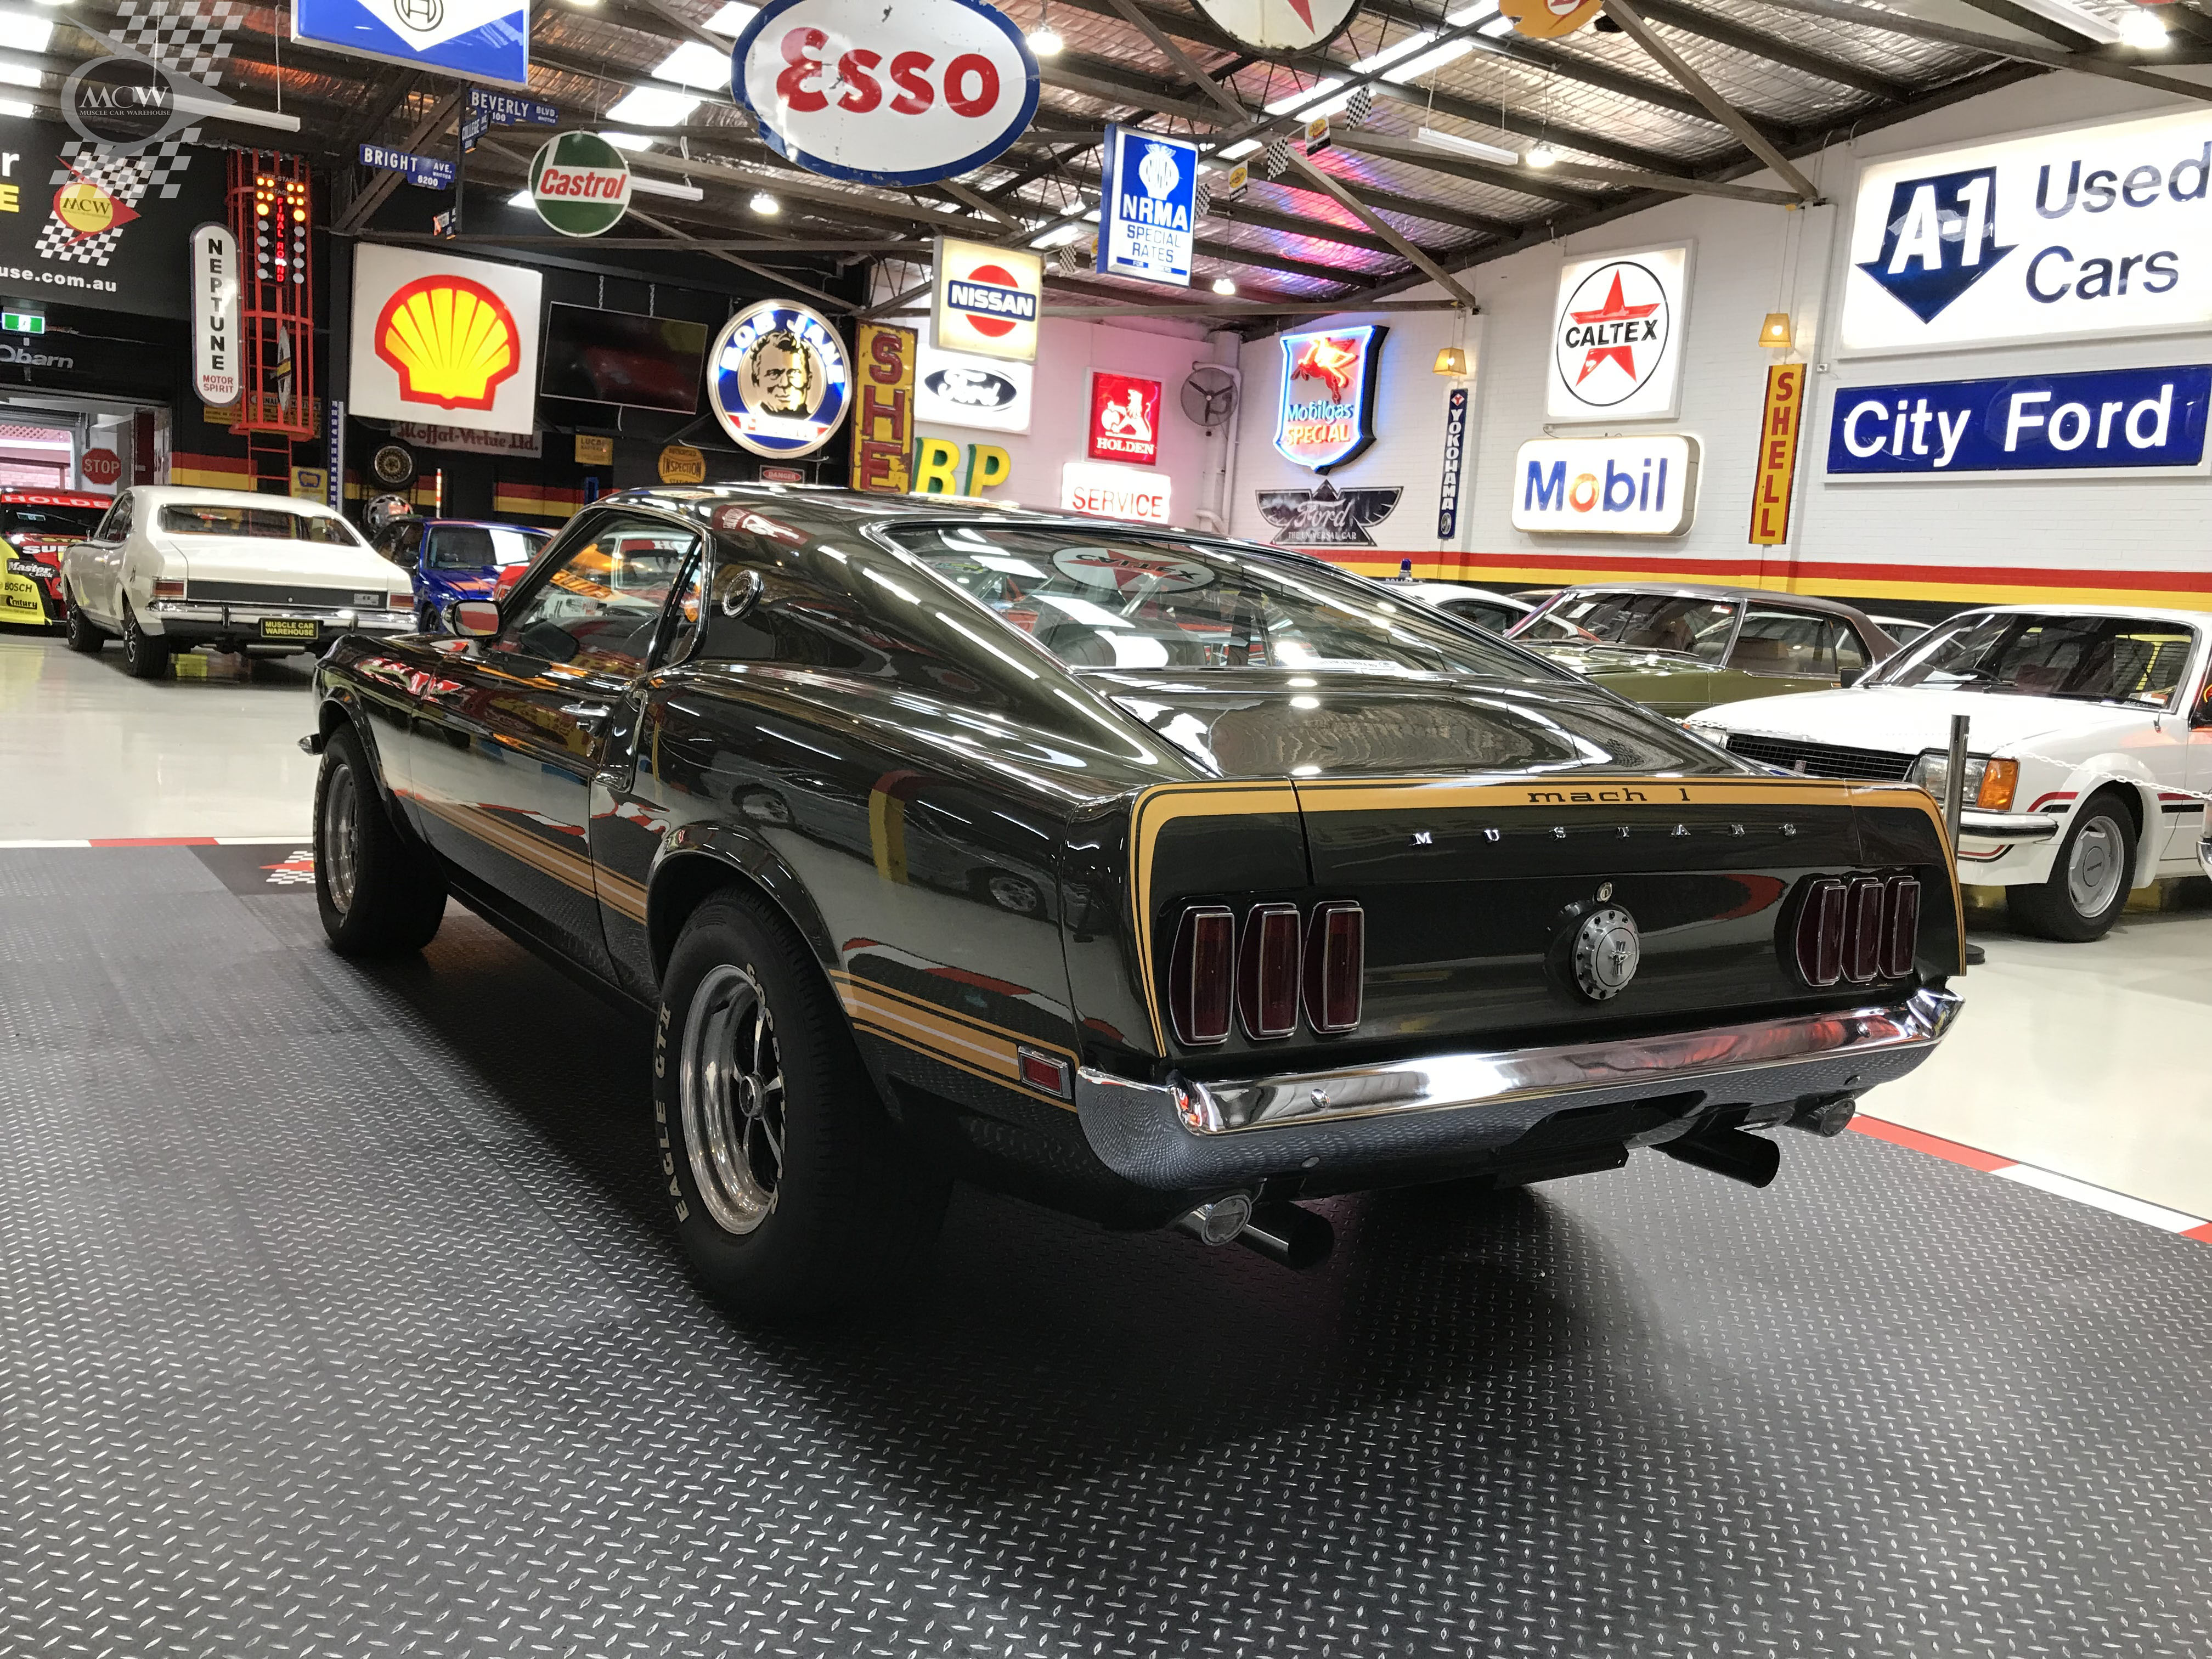 Ford Mustang 428 Cobra Jet | Muscle Car Warehouse